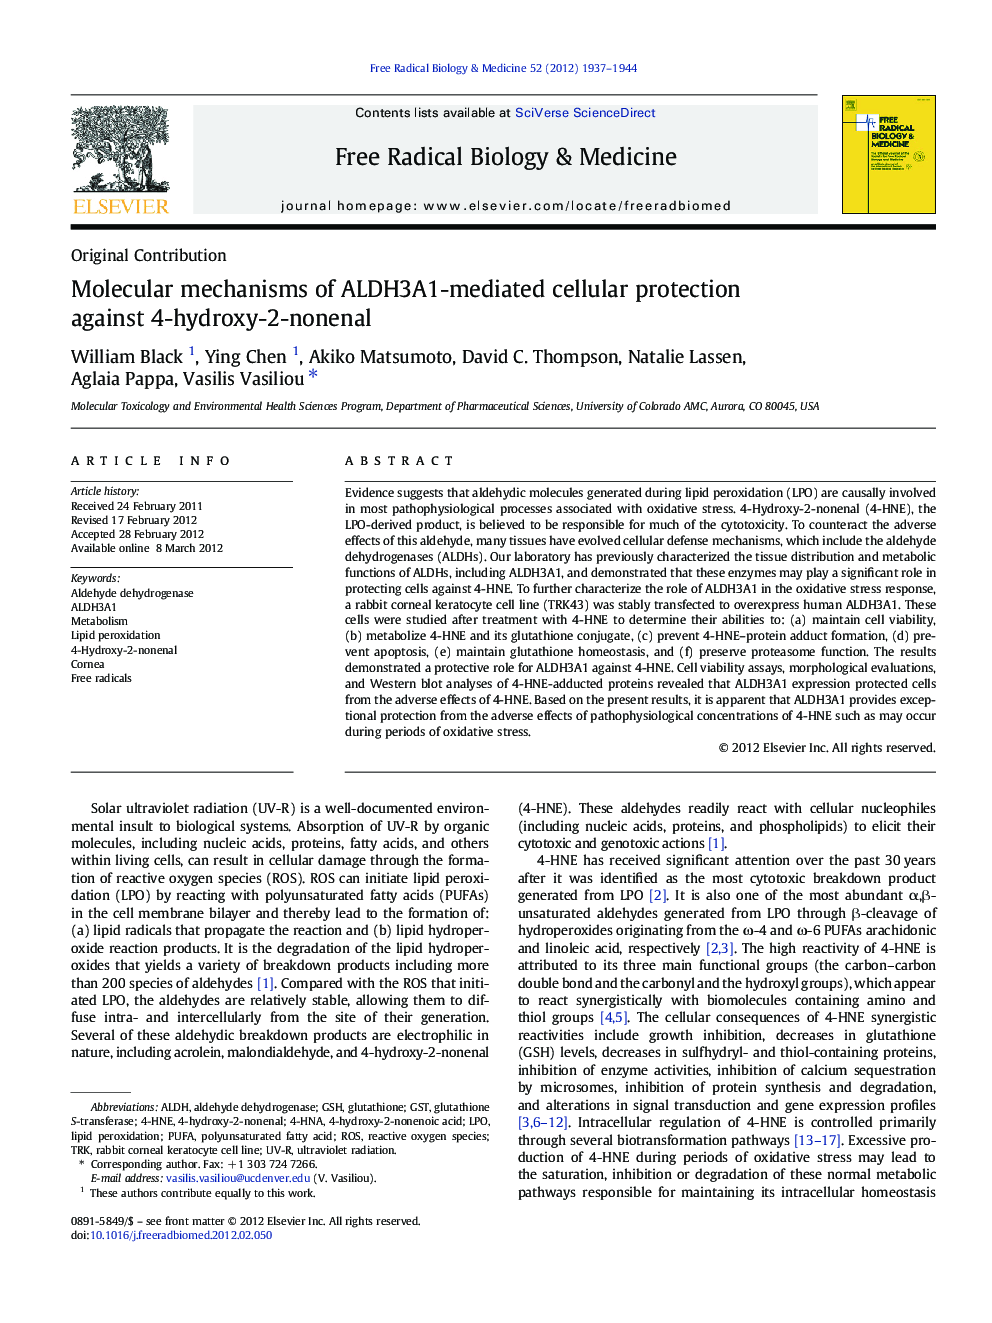 Molecular mechanisms of ALDH3A1-mediated cellular protection against 4-hydroxy-2-nonenal